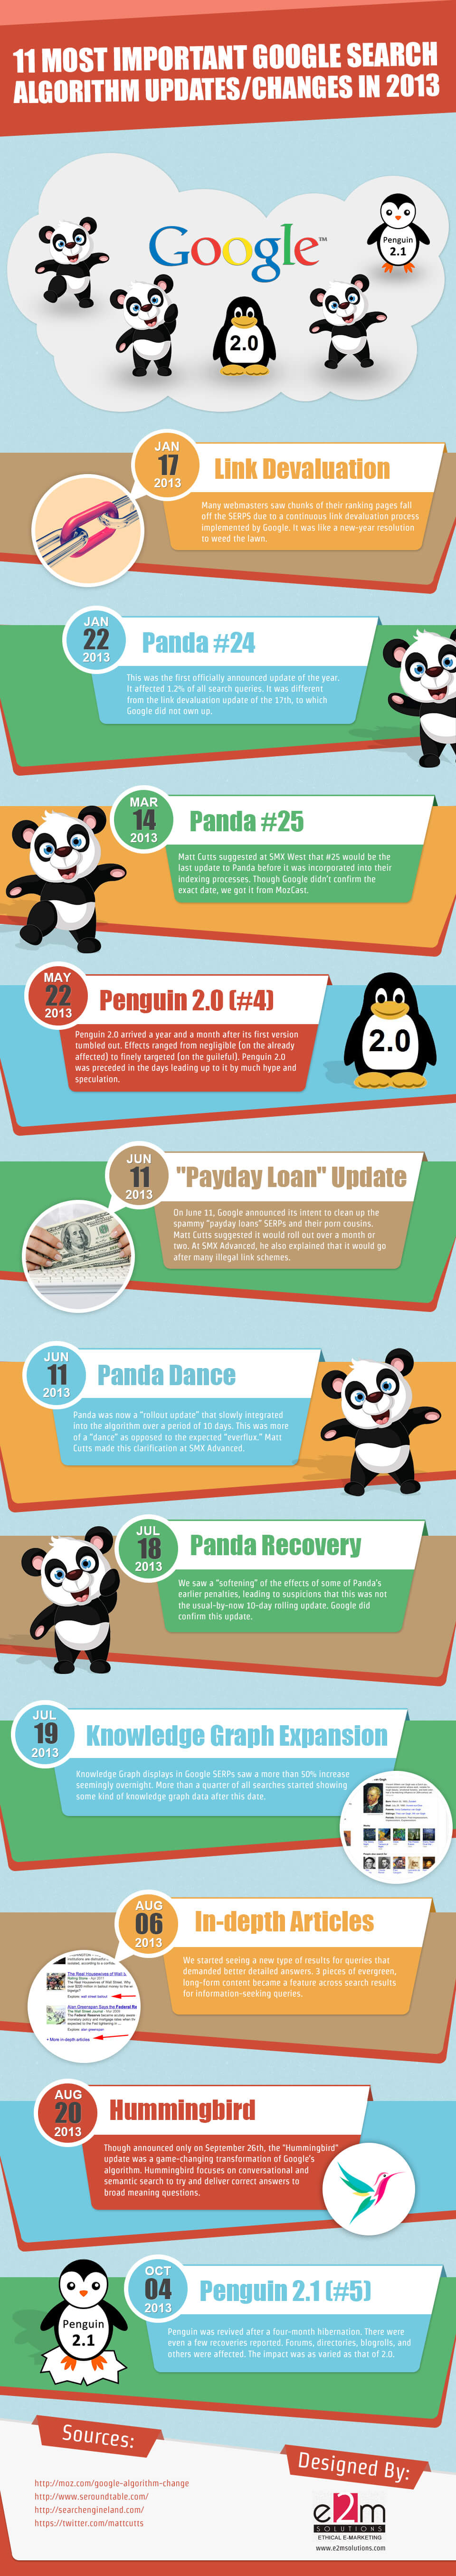 11 Most Important Google Search Algorithm Changes In 2013